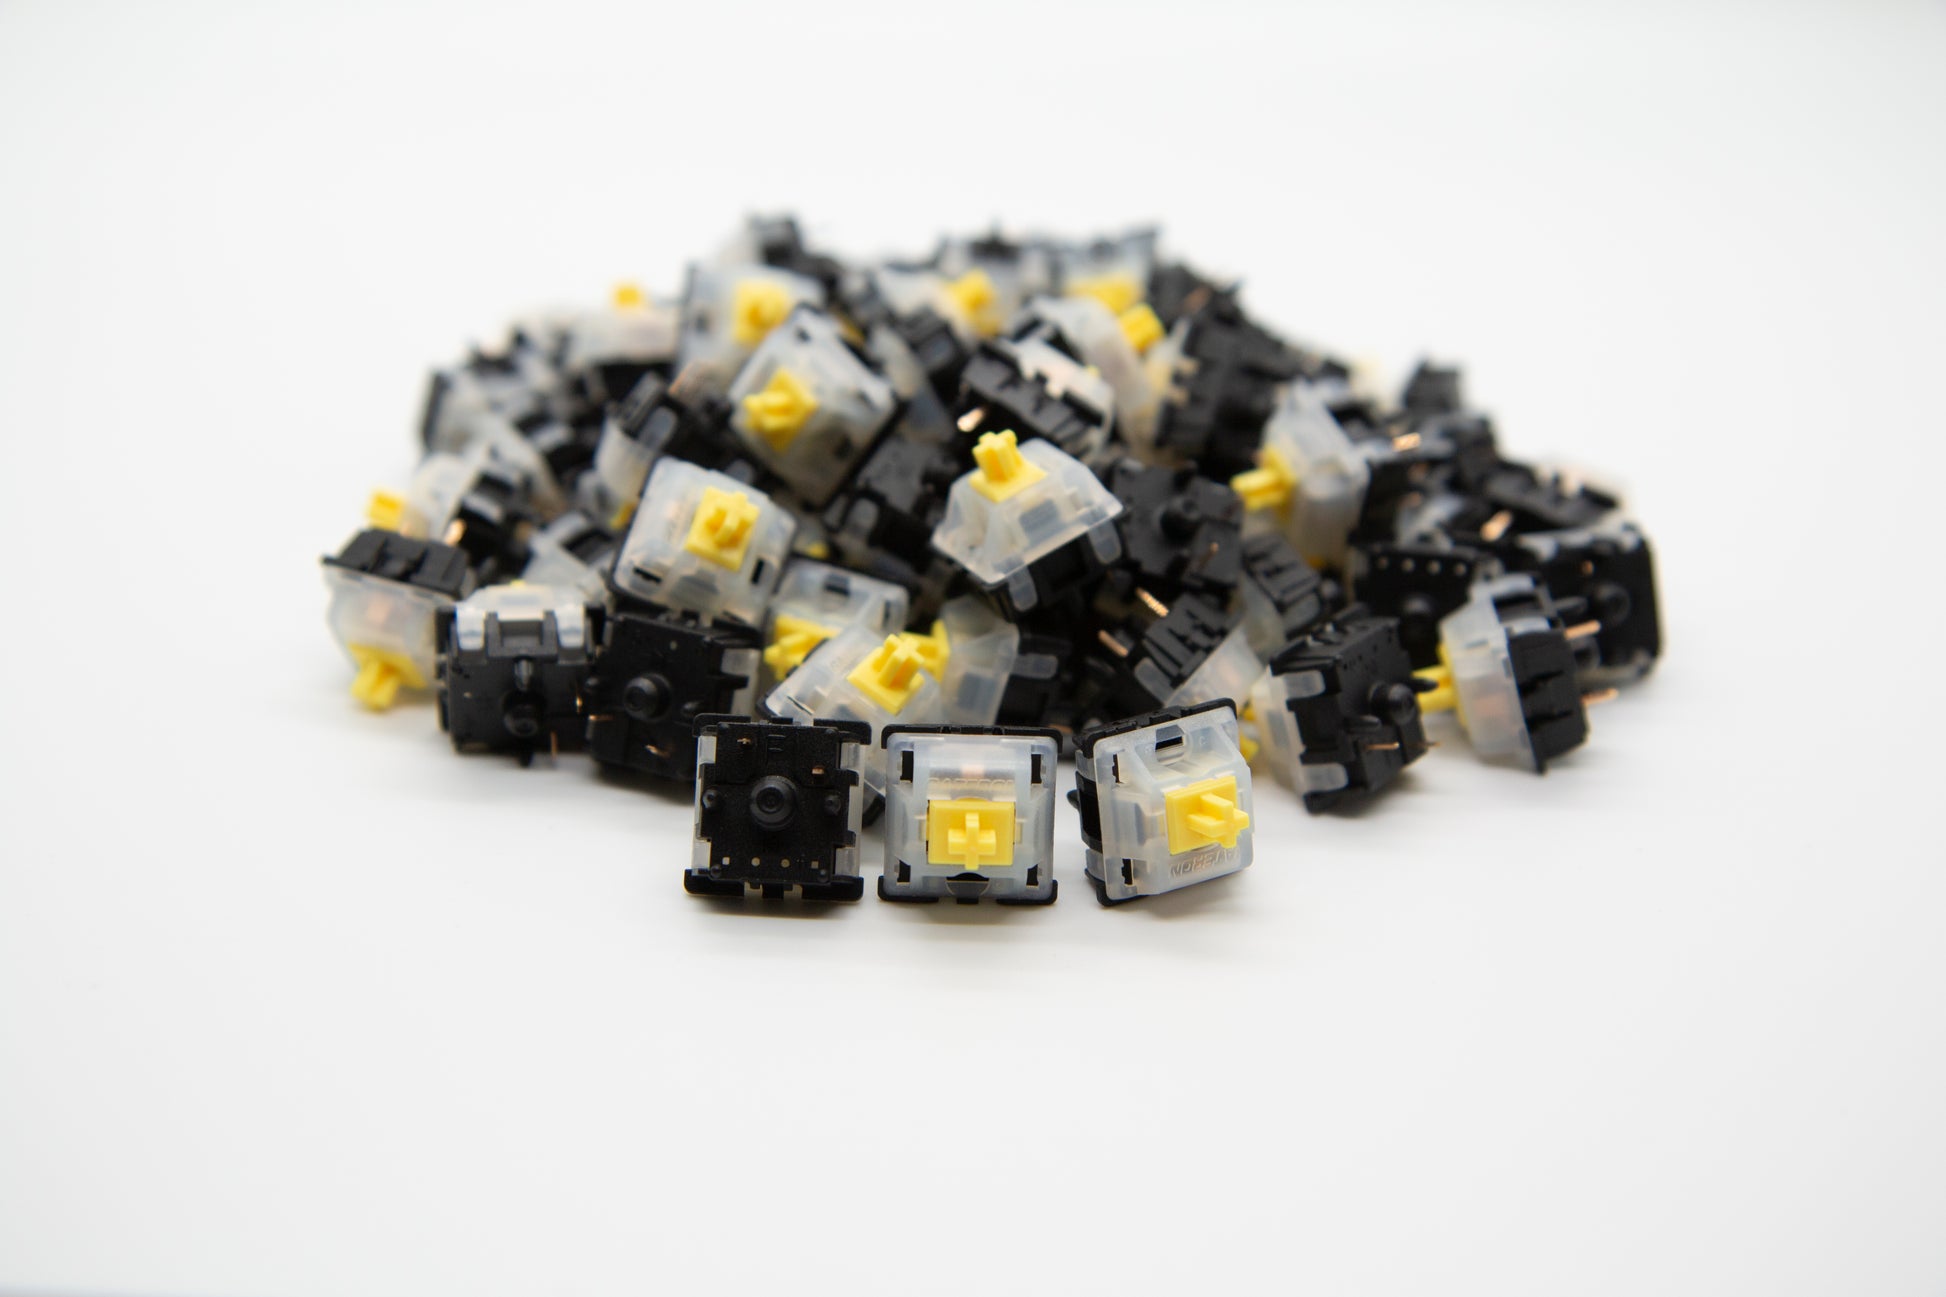 Close-up shot of a pile of Gateron Yellow mechanical keyboard switches featuring black and white housing and yellow stems